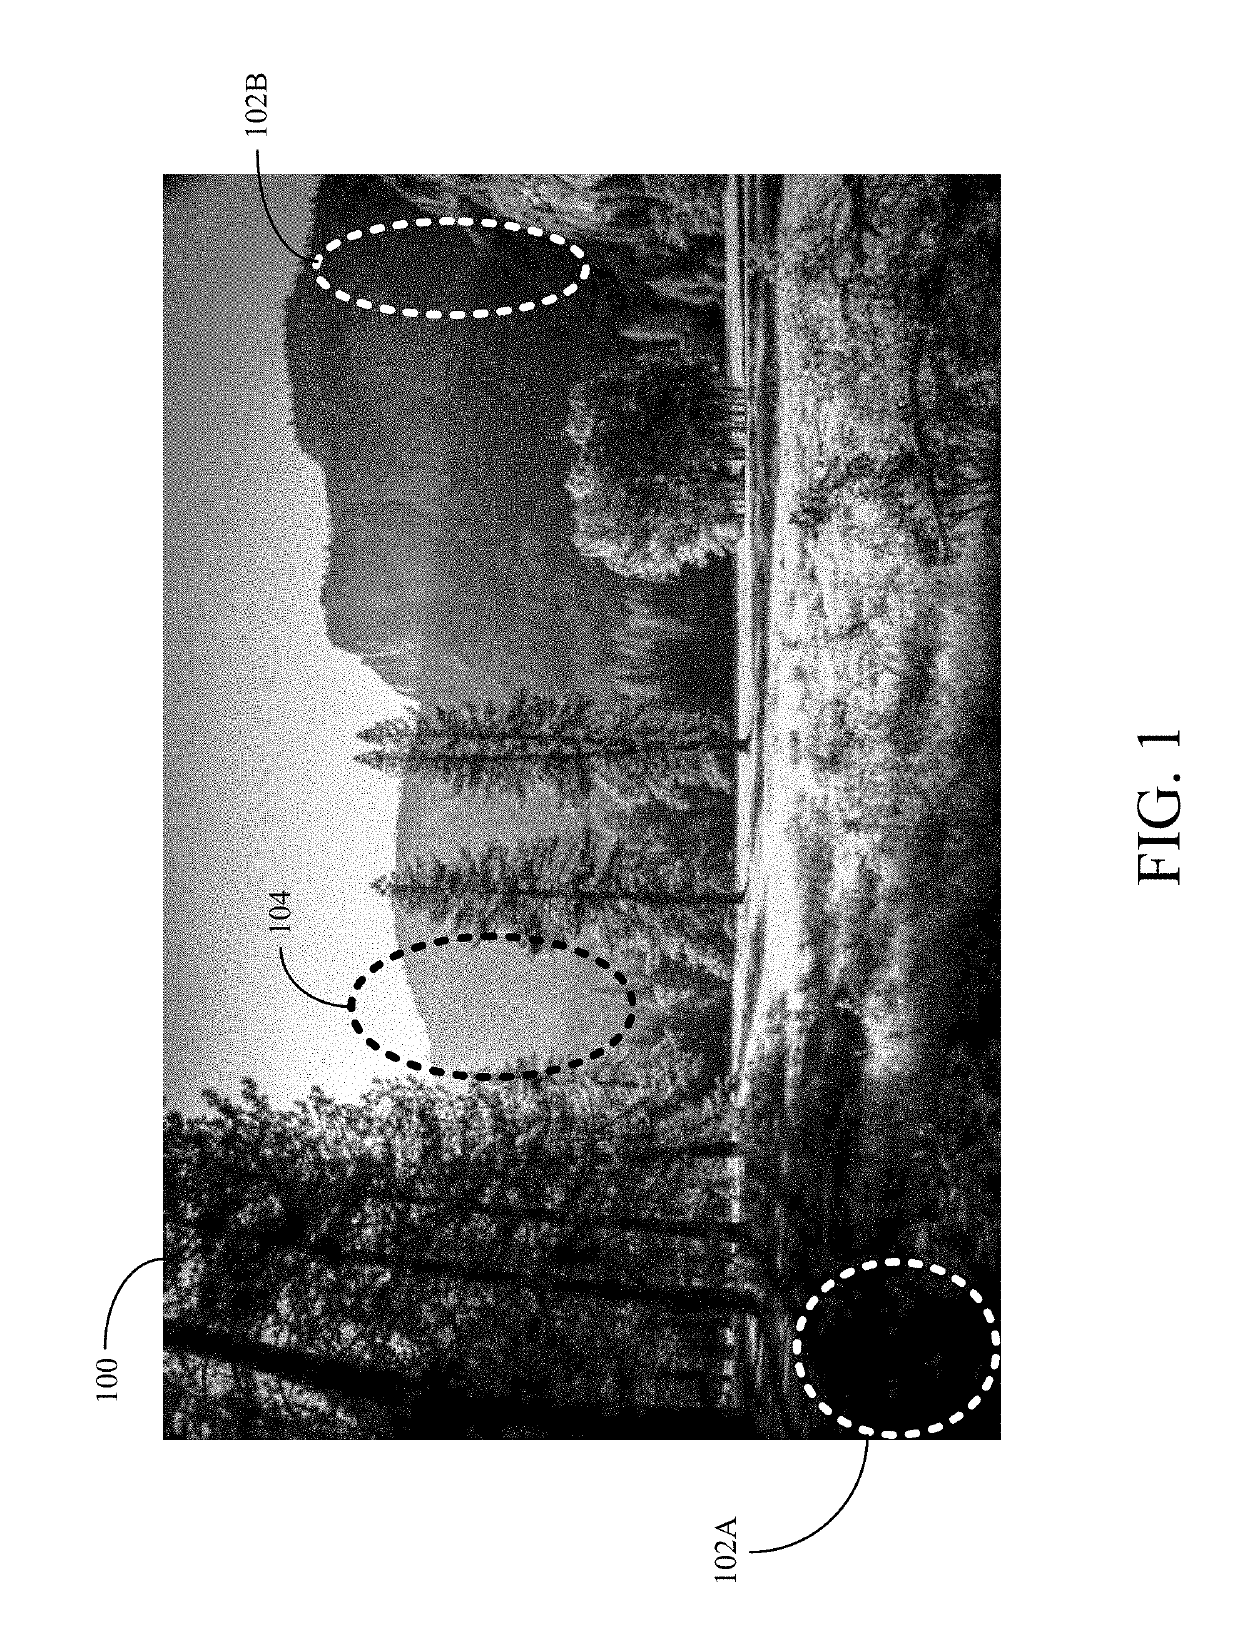 Systems and methods for high-dynamic range imaging